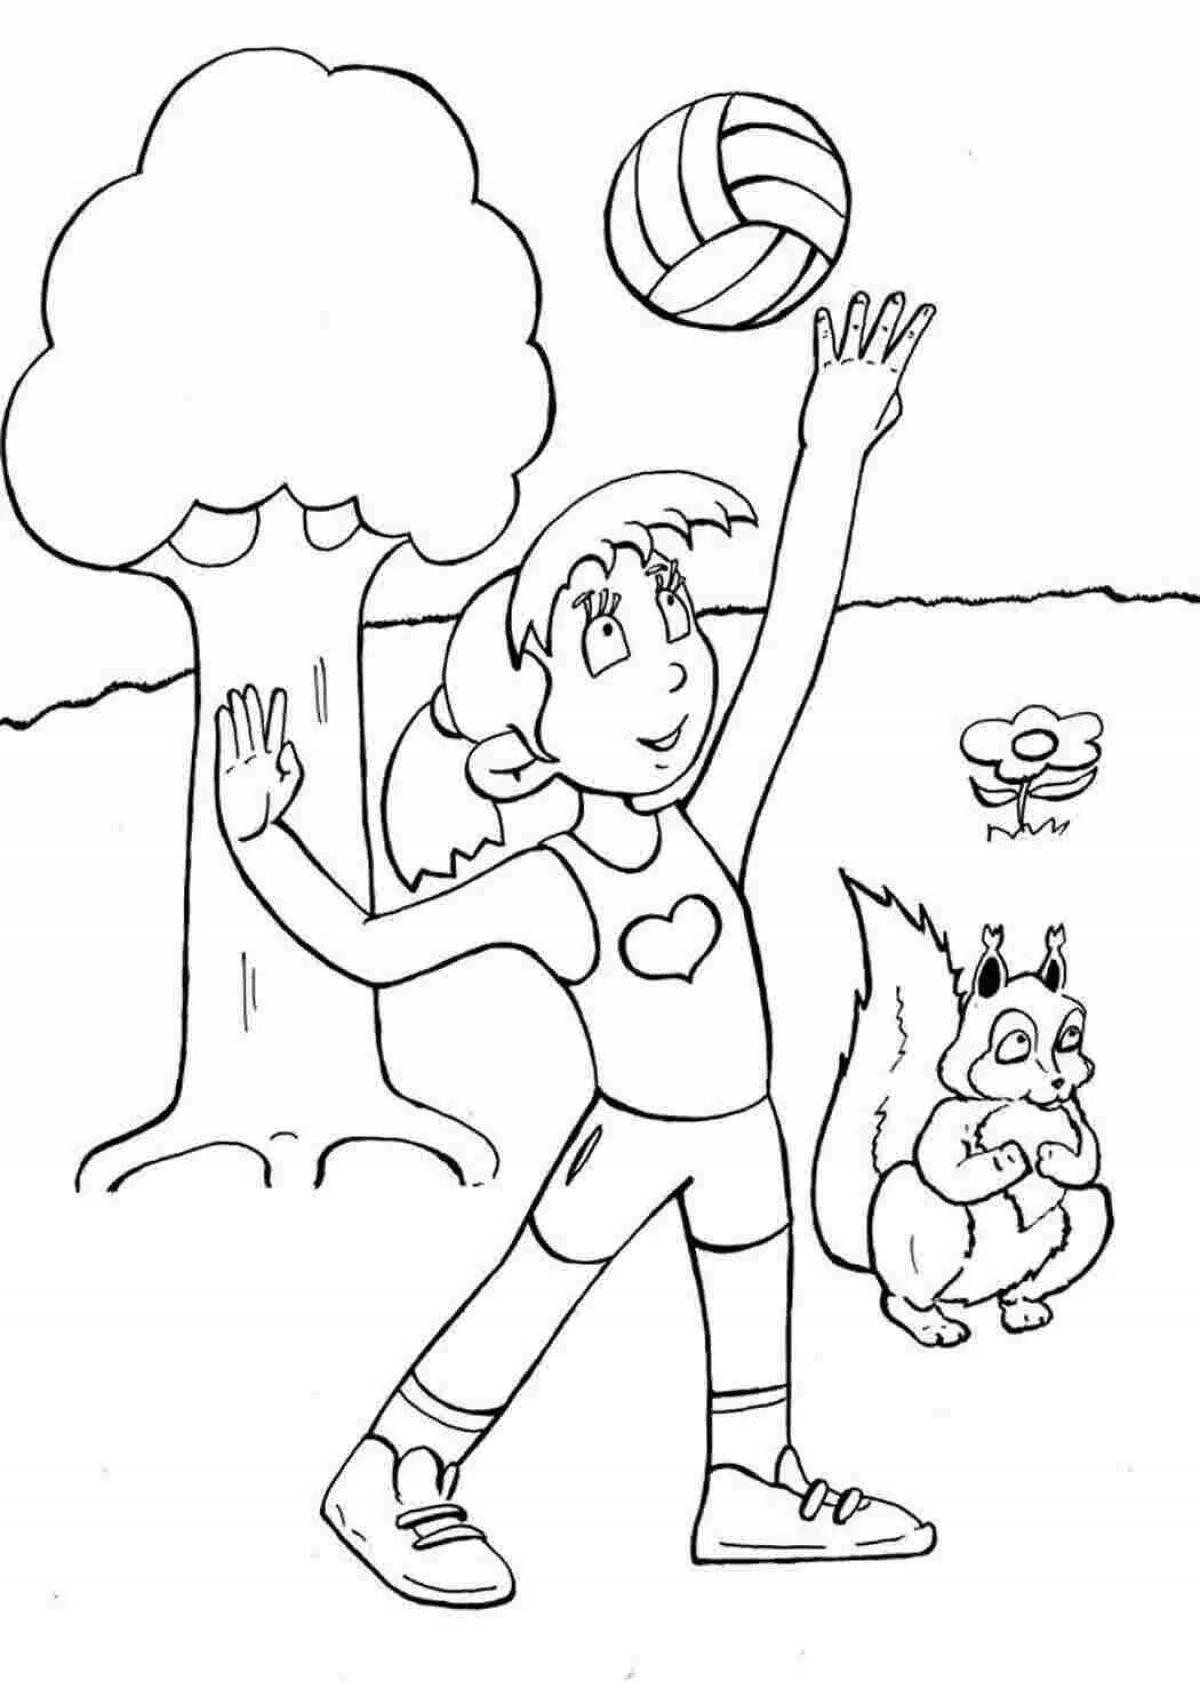 Coloring book about bad habits for elementary school